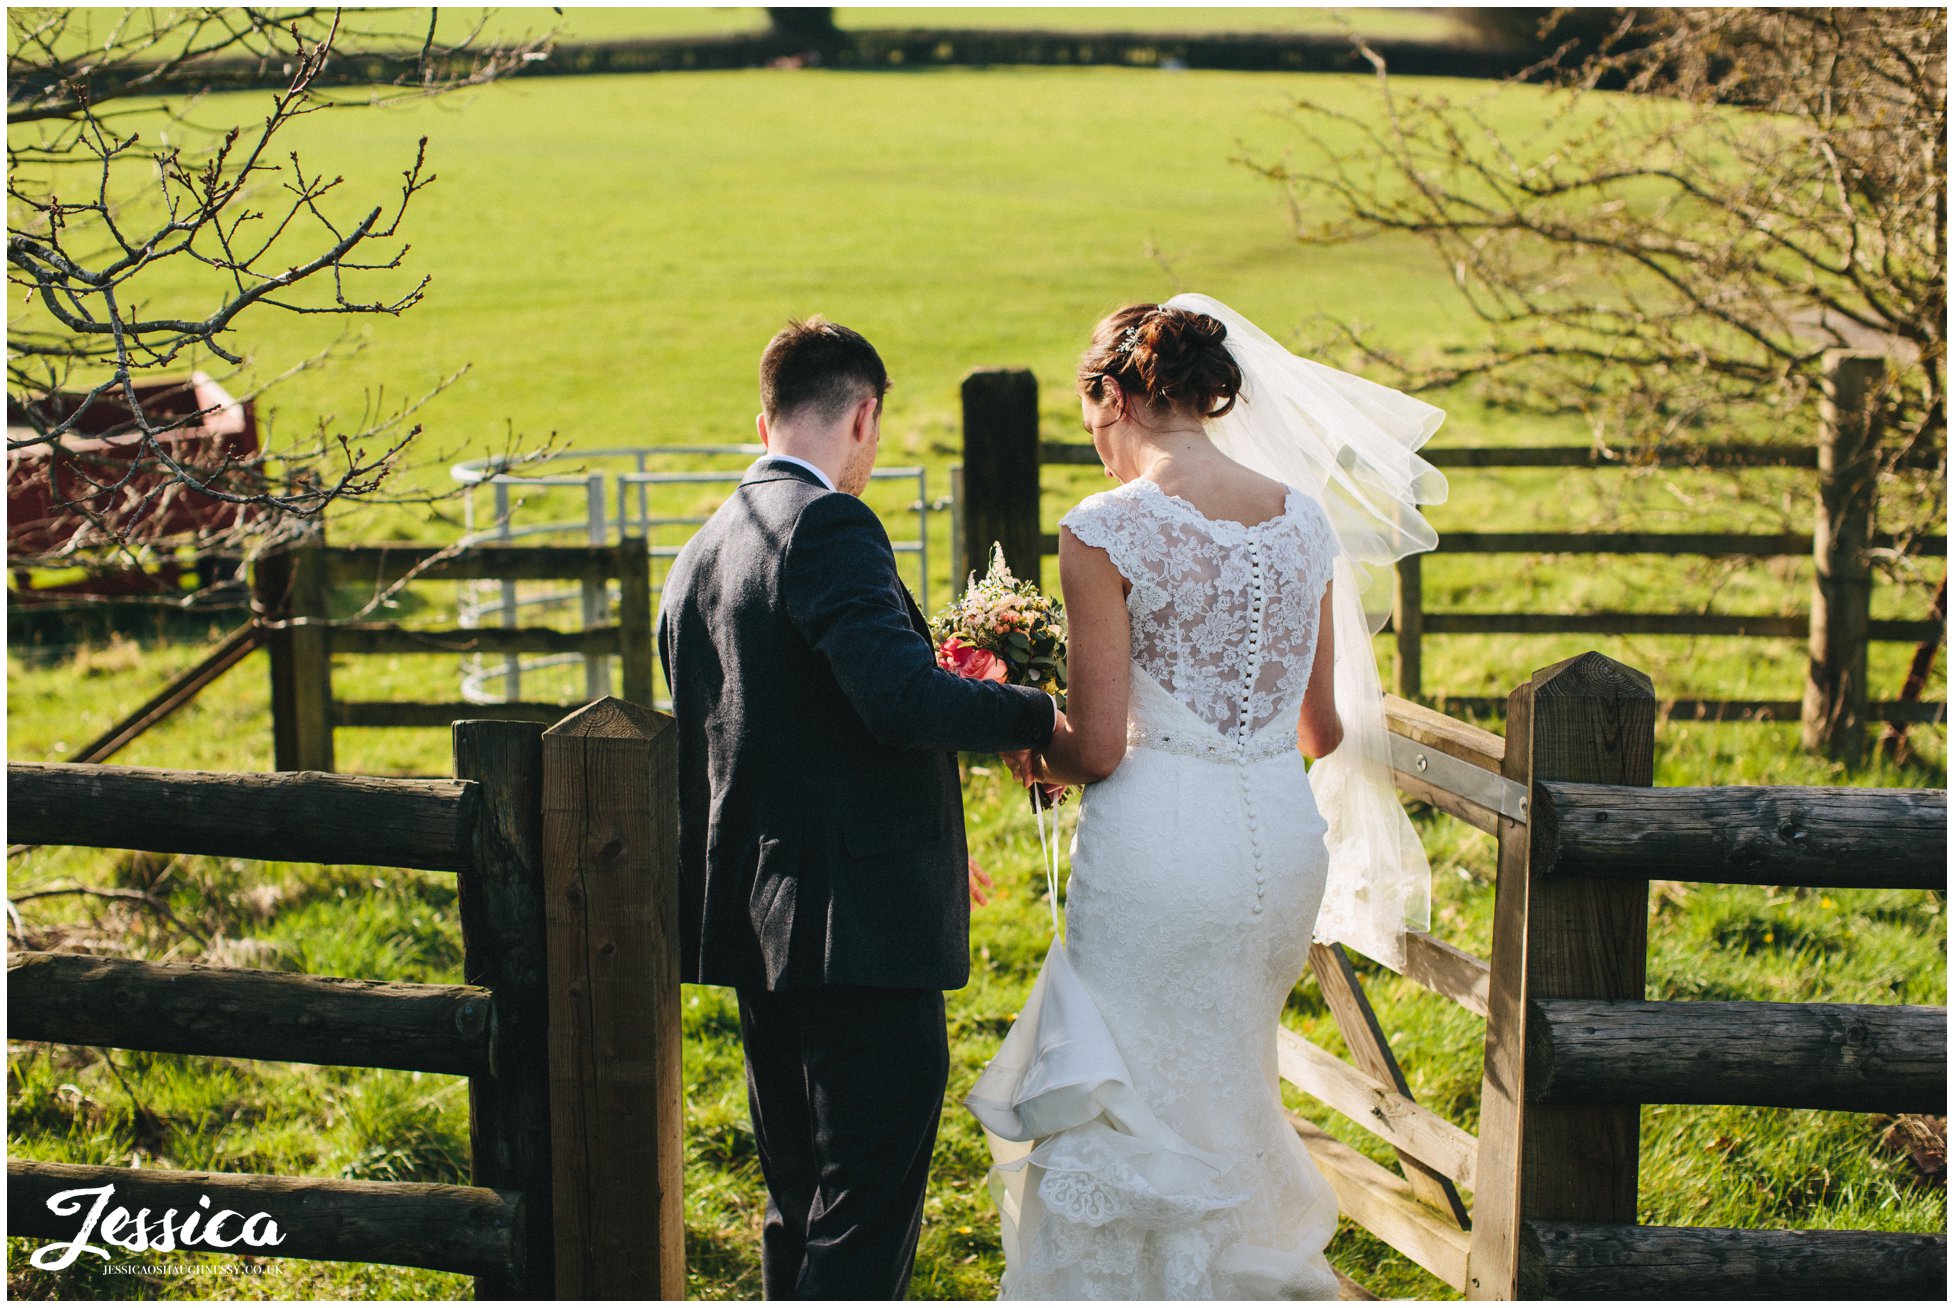 groom helps his bride through wooden gate on their wedding day - north wales wedding photographer